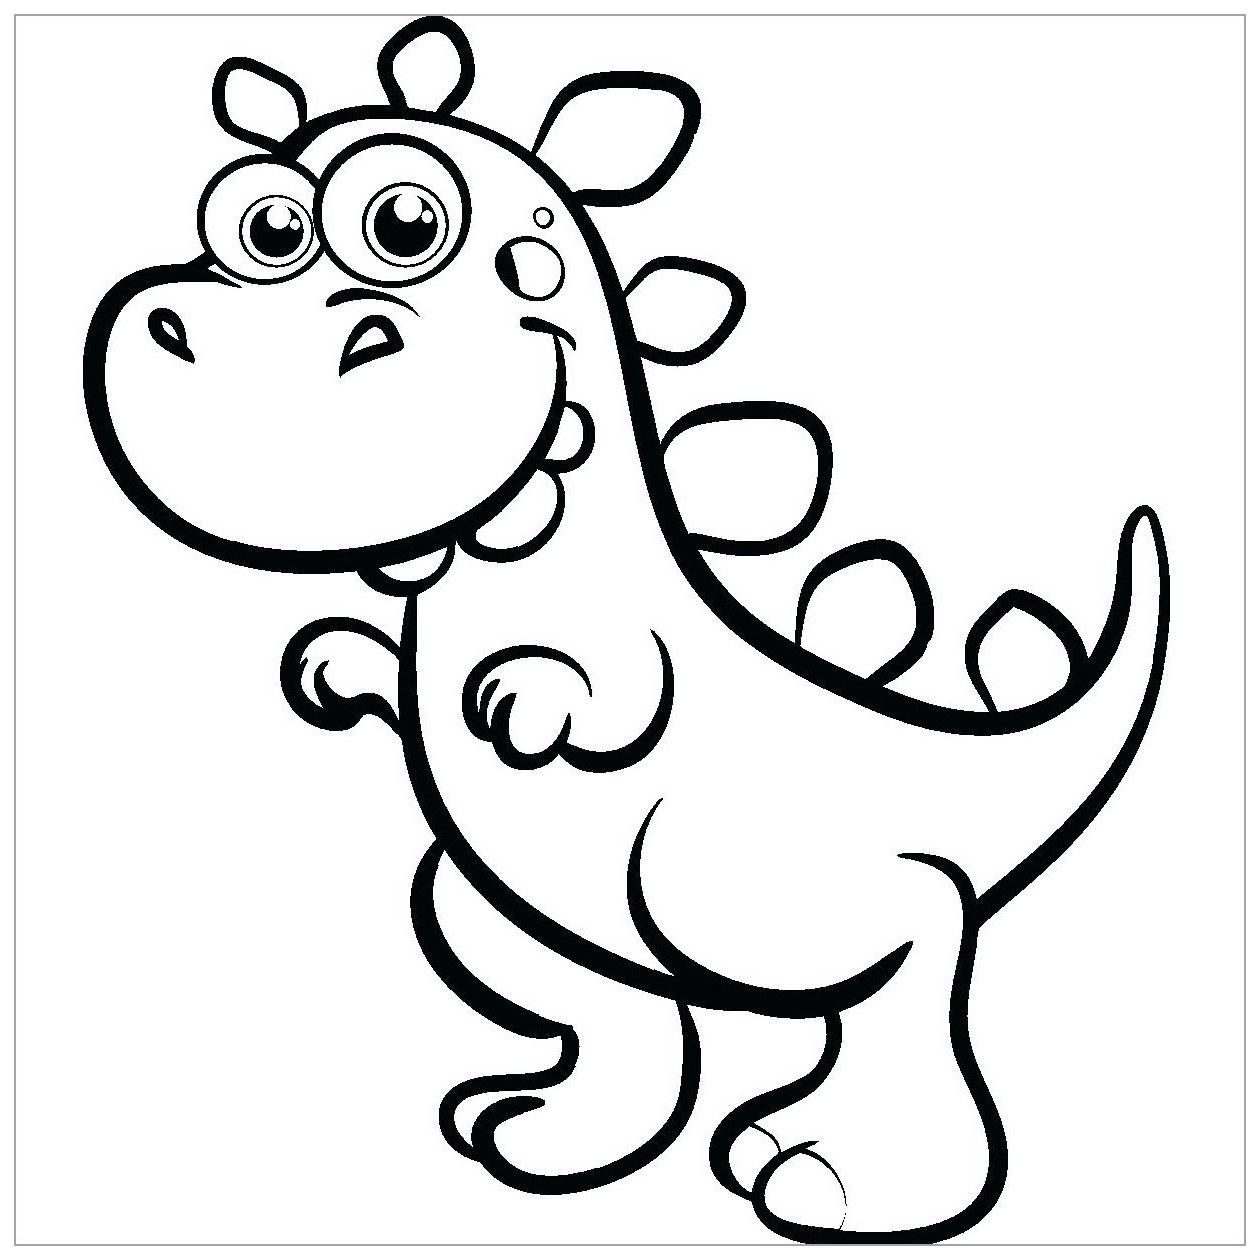 dinosaurs to color for kids ba dinosaurs kids coloring pages